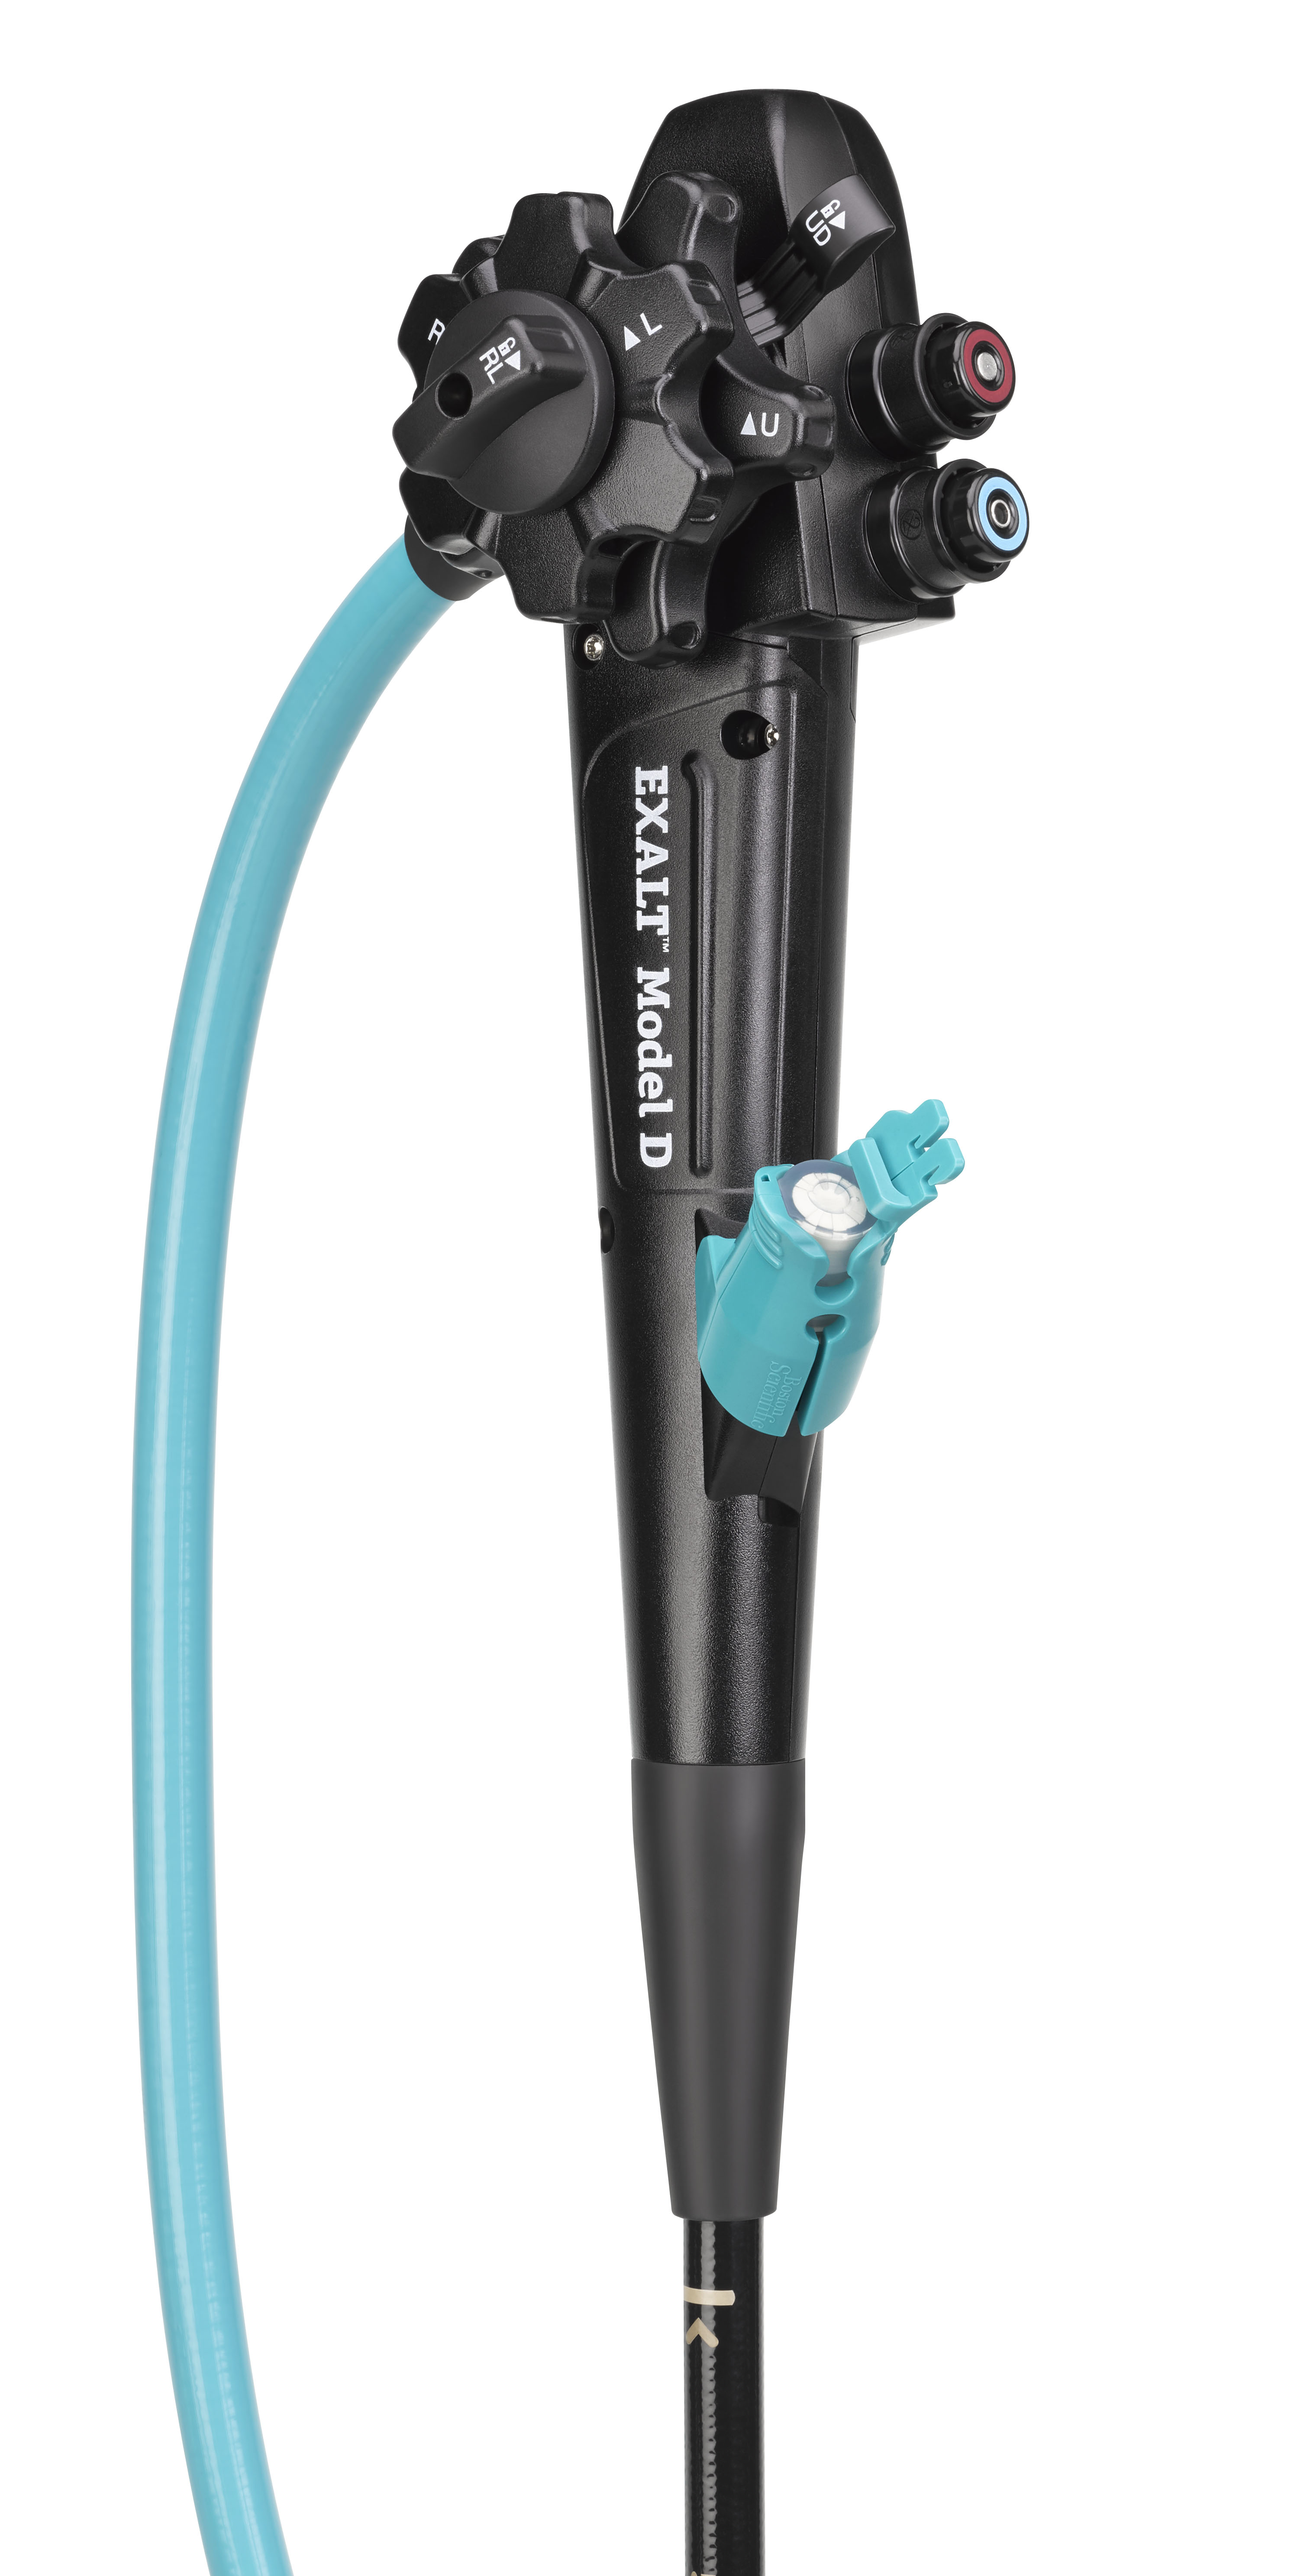 EXALT Model D Single-Use Duodenoscope, Generation 3 with AutoCap™ RX Integrated Biopsy Cap and Guidewire Locking Device